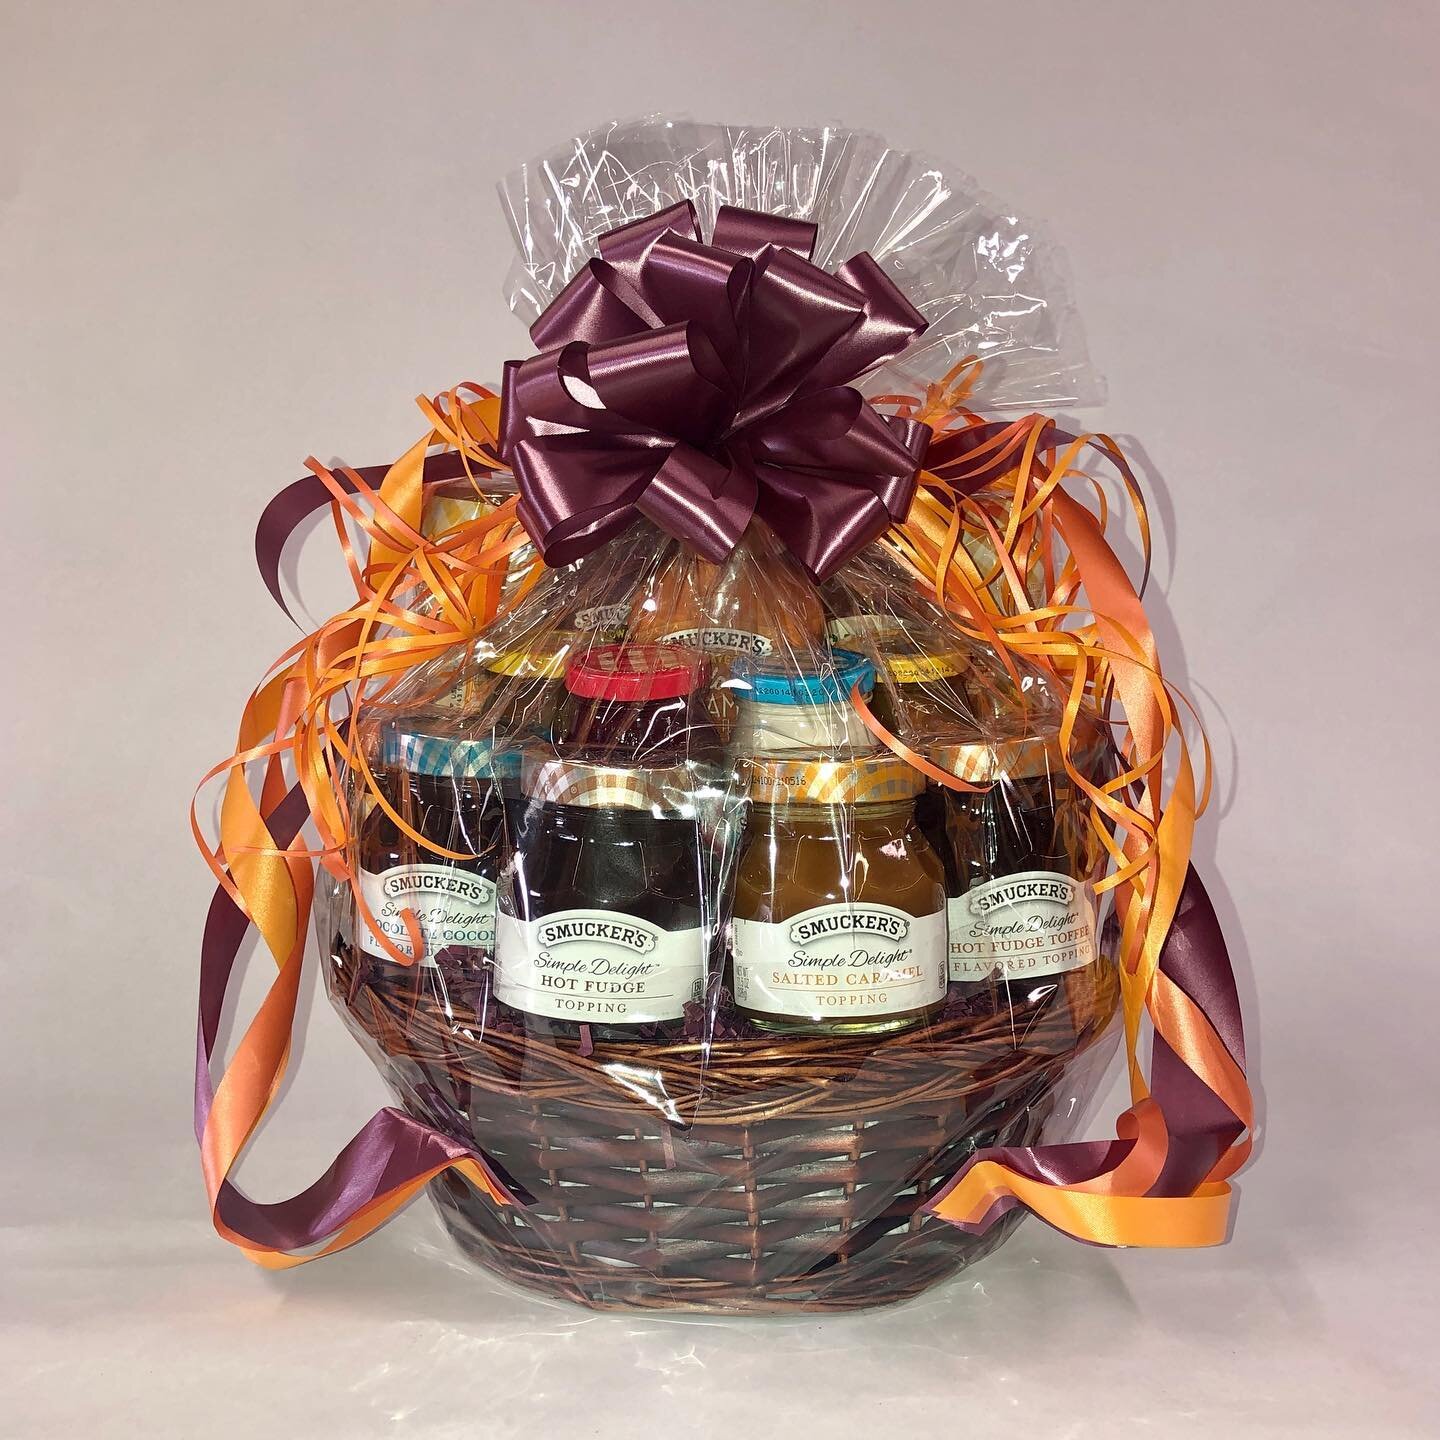 We have so many great baskets for our Annual Auction Fundraiser this year! 

Check out our website under the 2020 Auction page to find the full catalog. We will be adding new baskets everyday until November 7th when bidding opens!